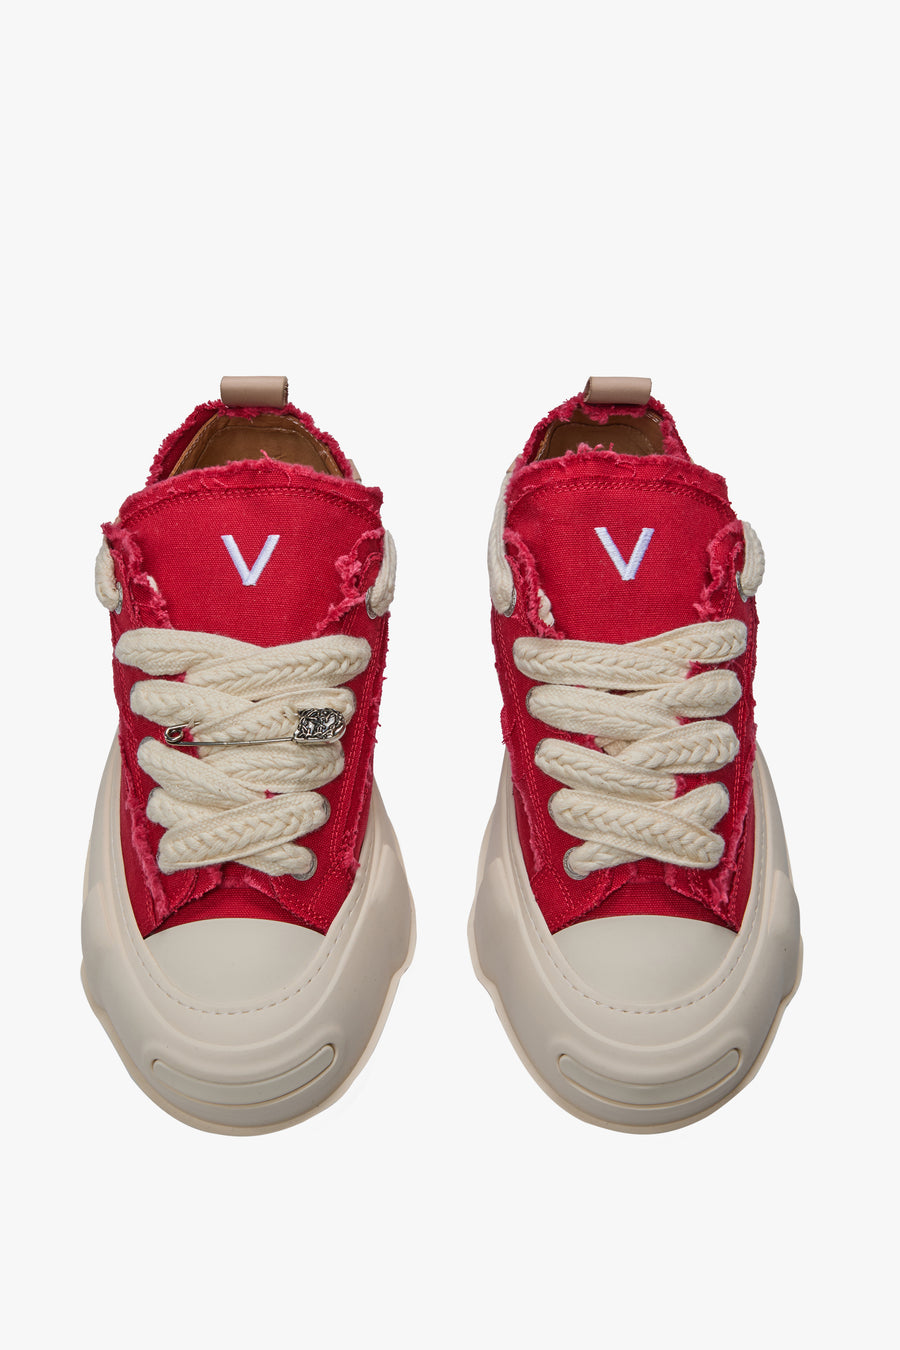 "VISION" RED SHOES